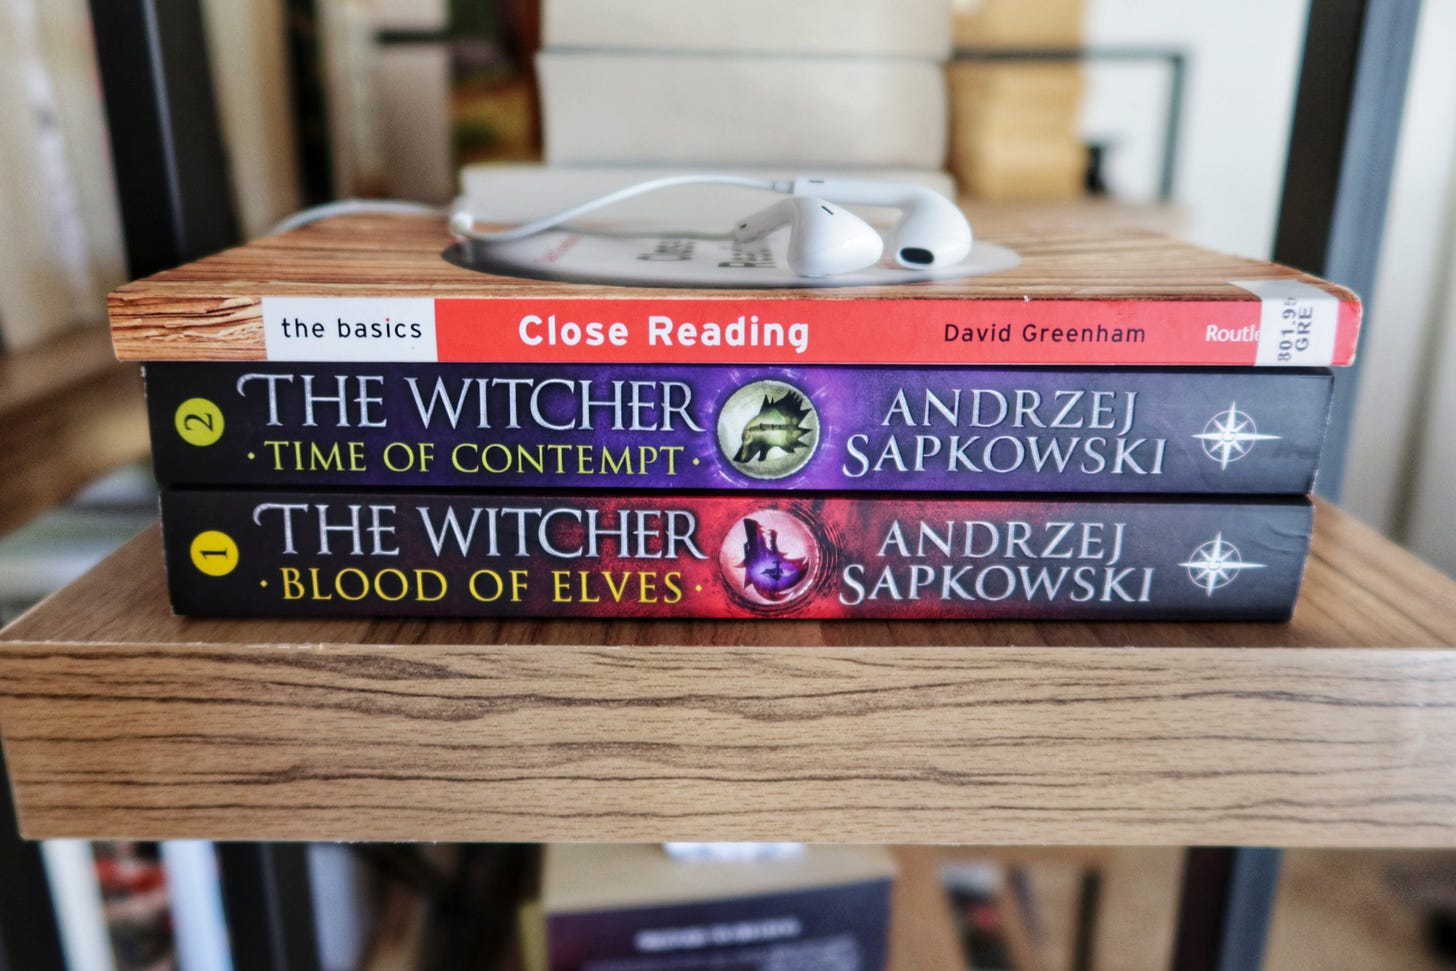 Small pile of books with earbuds on top. Books (top to bottom): CLOSE READING: THE BASICS by David Greenham; THE WITCHER TIME OF CONTEMPT by Andrzej Sapkowski; THE WITCHER BLOOD OF ELVES by Andrzej Sapkowski.